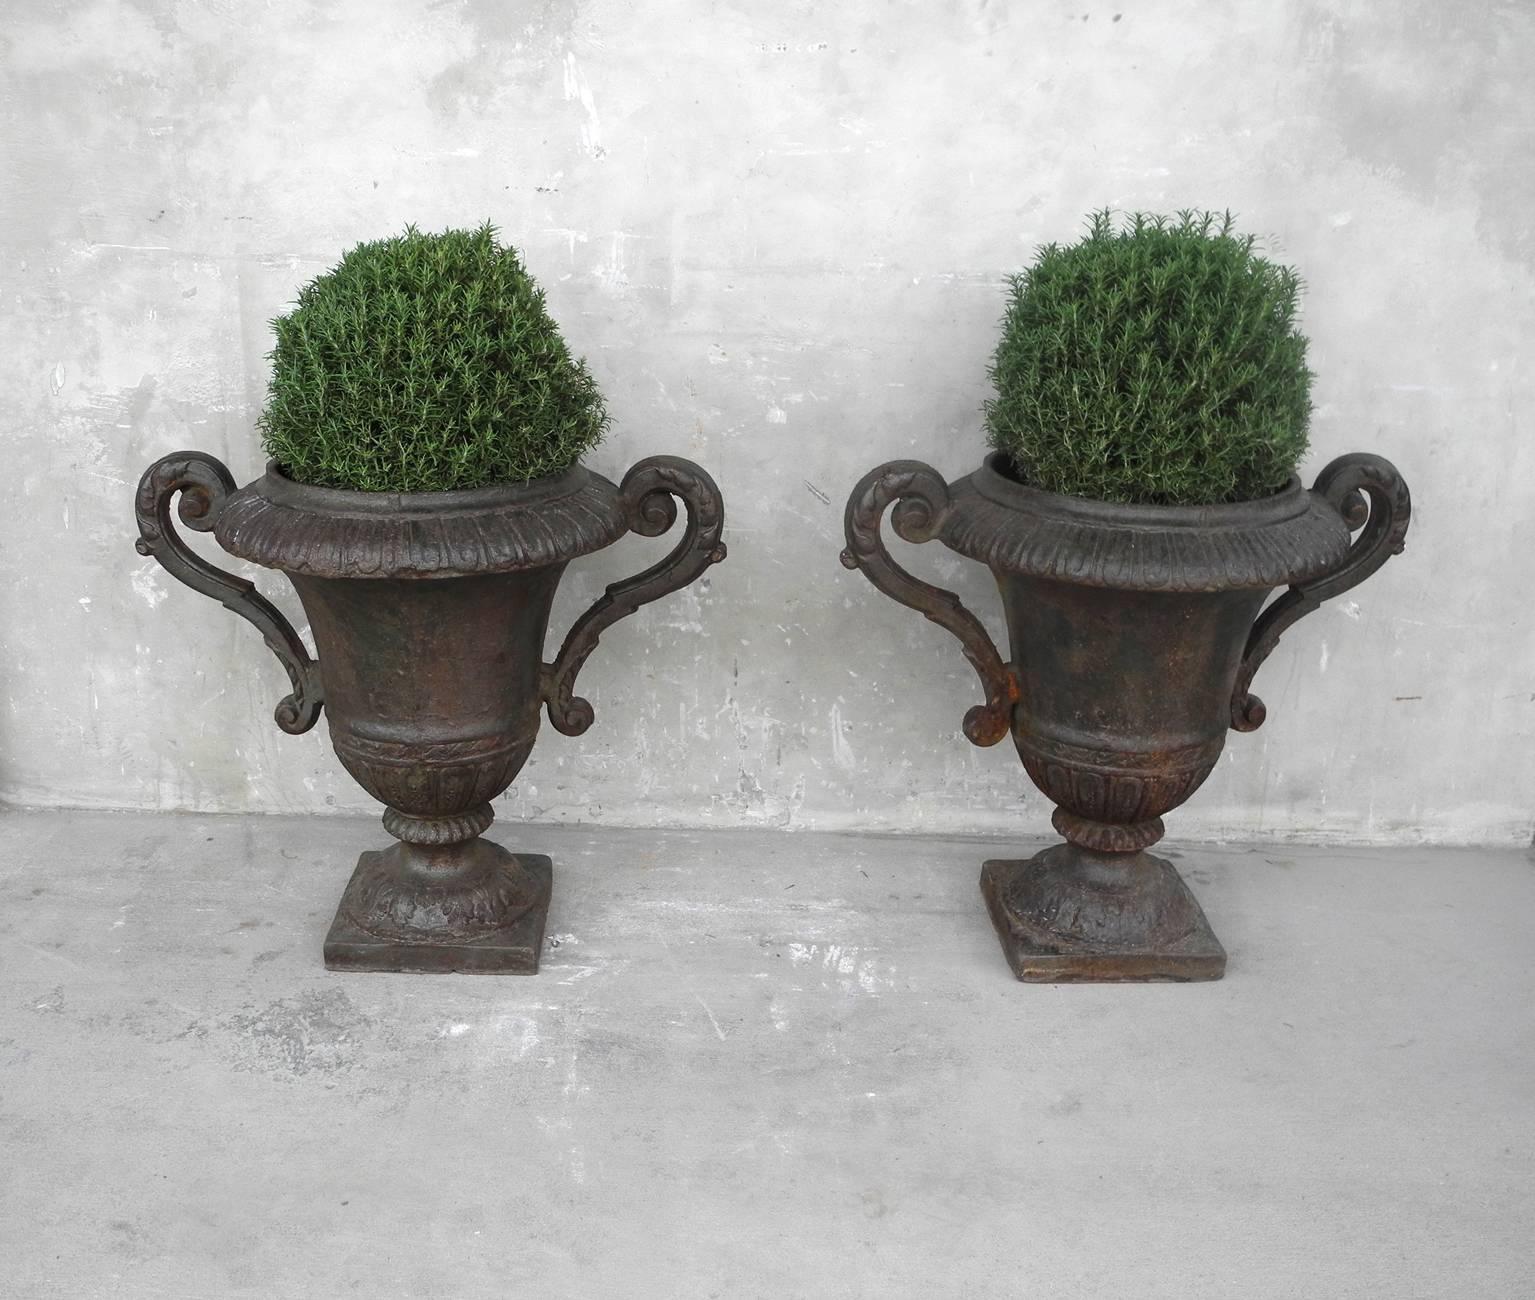 This is a reclaimed pair of antique 19th century French garden urns. They are made of iron and an exact pair, so they are perfect for flanking in a garden space. They can stand alone or with greenery added. They have beautiful carved detailing, as